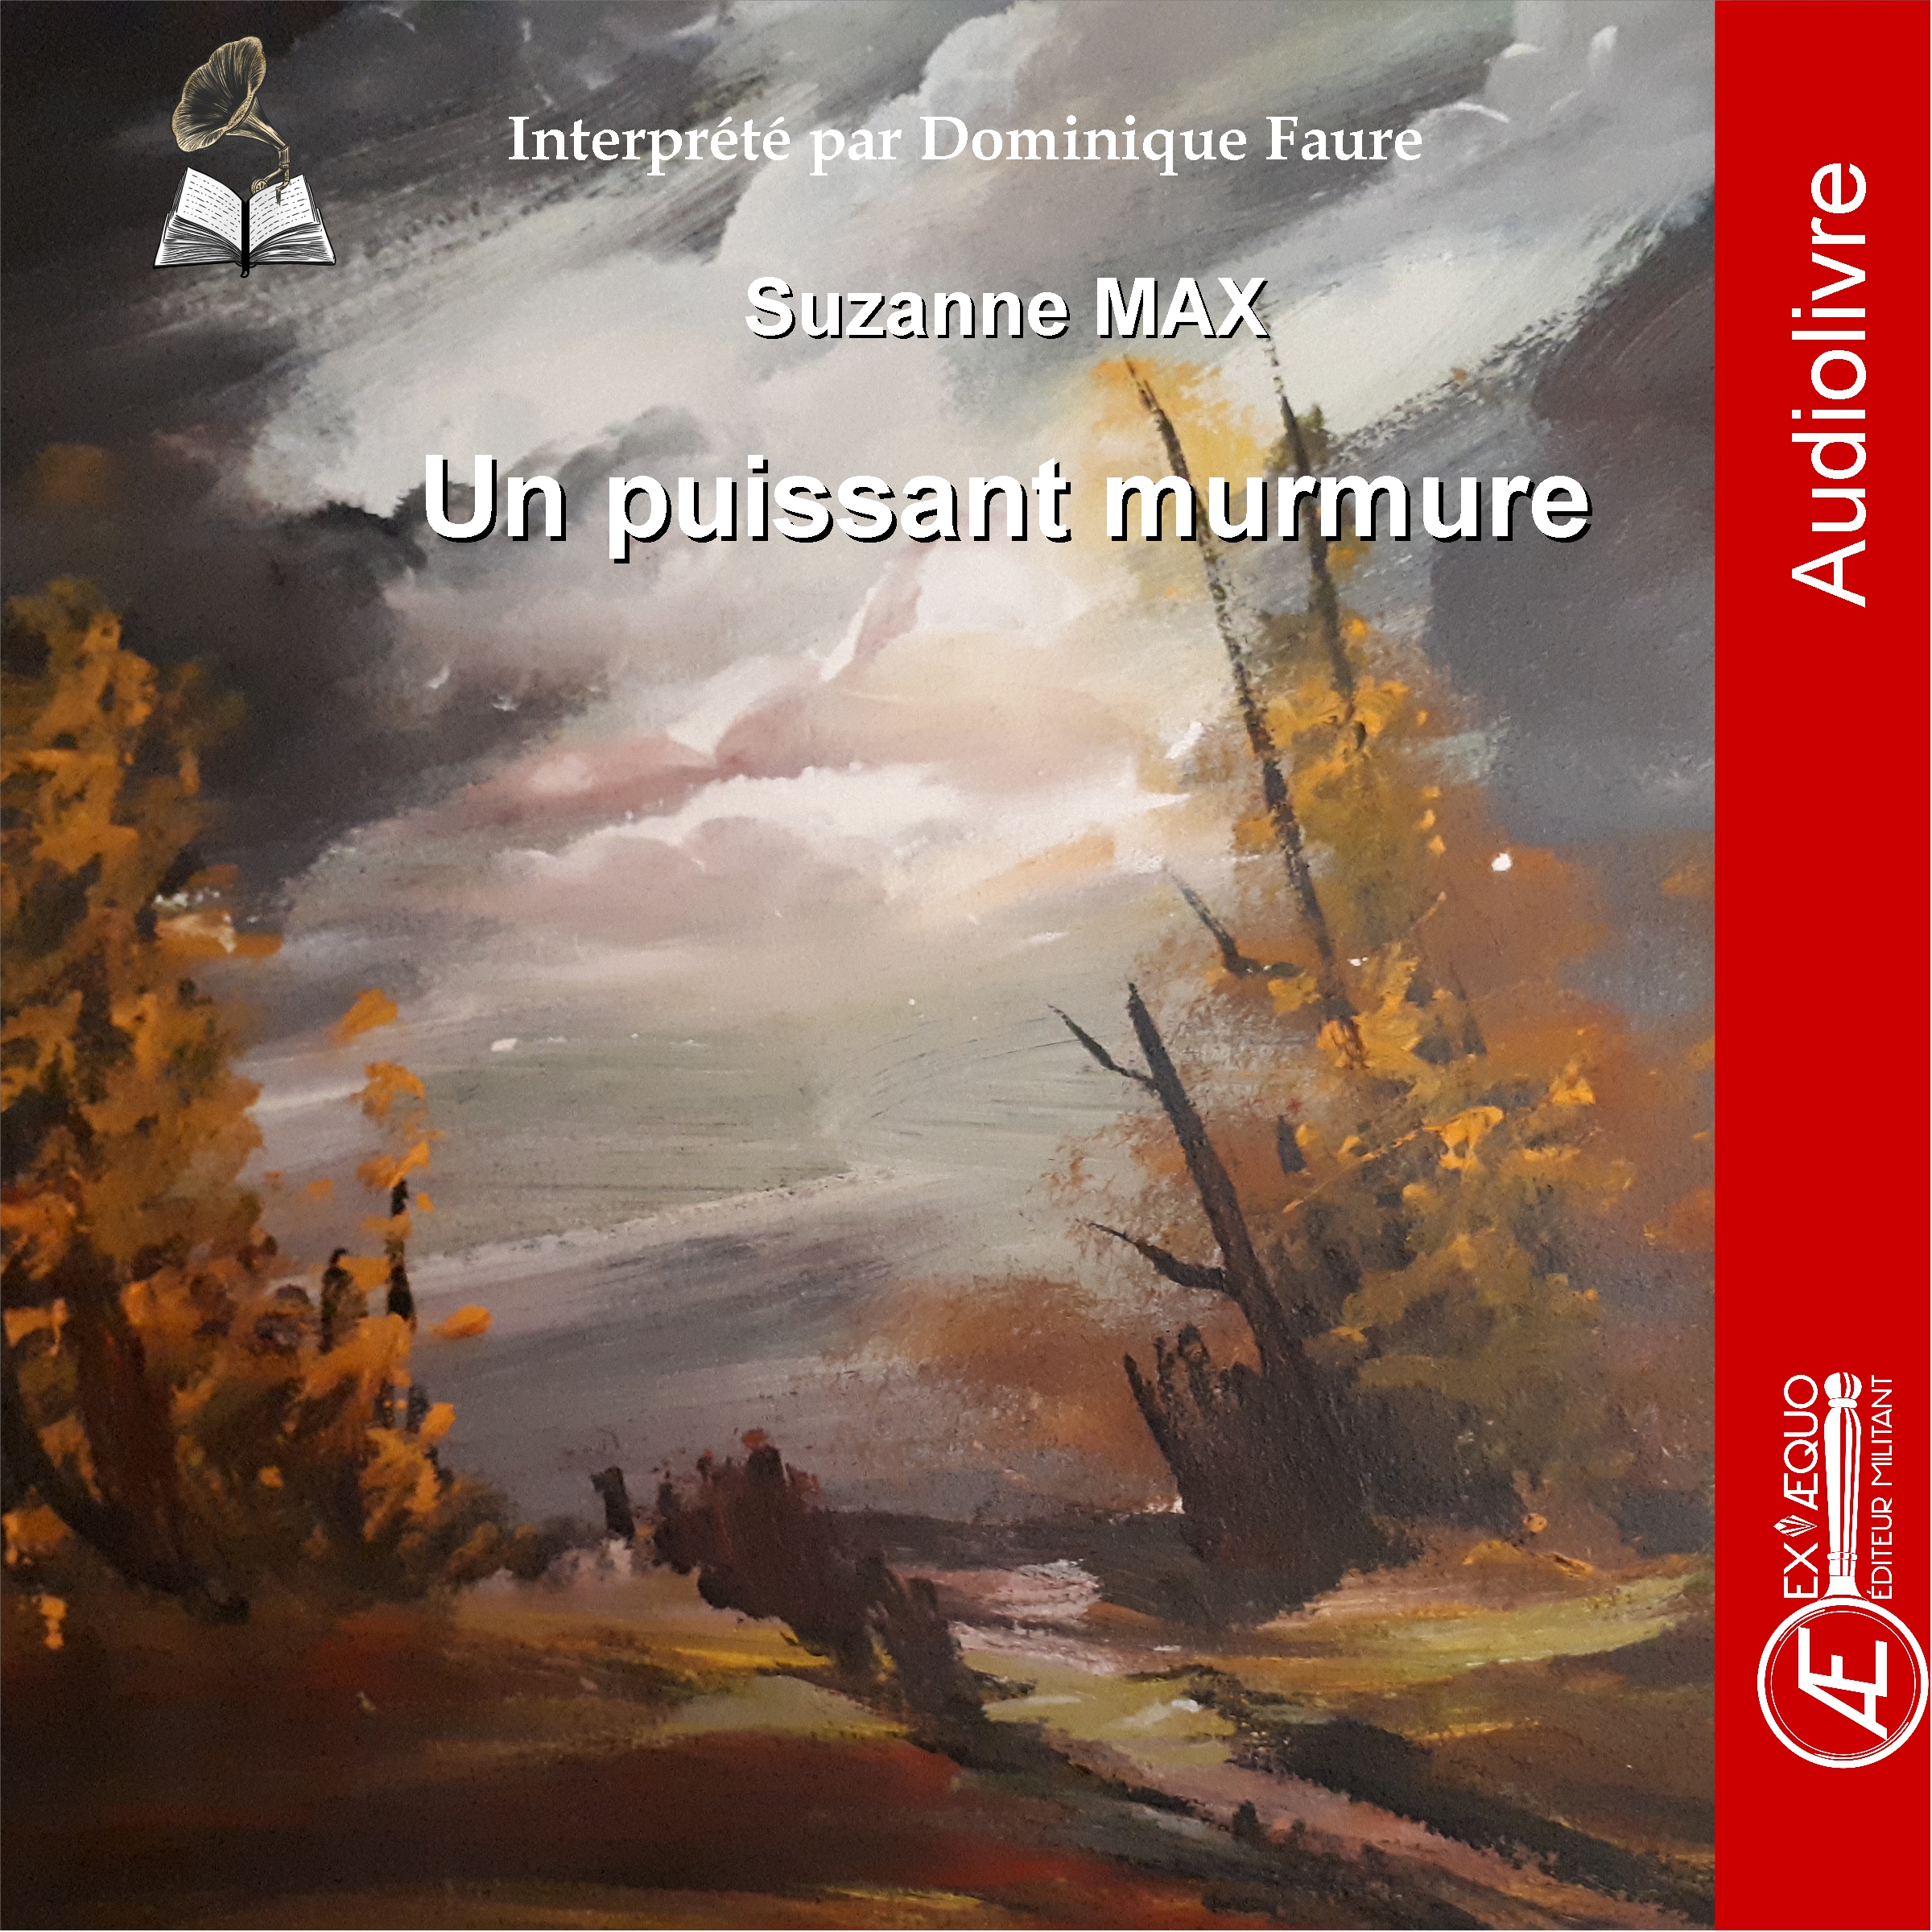 You are currently viewing Un puissant murmure – audiolivre